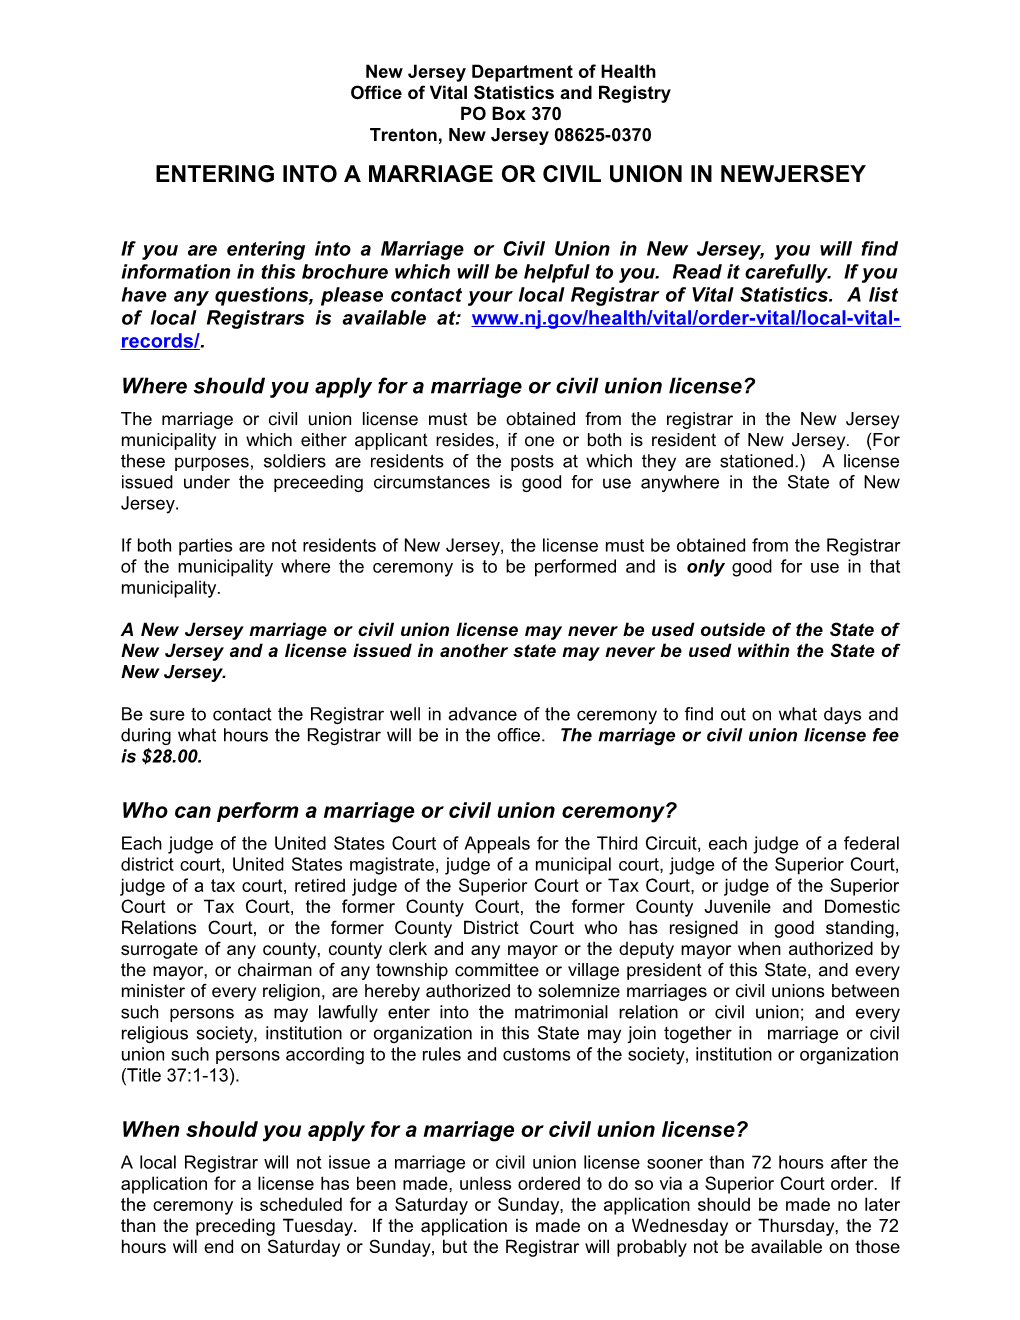 REG-D30, Entering Into a Marriage Or Civil Union in New Jersey